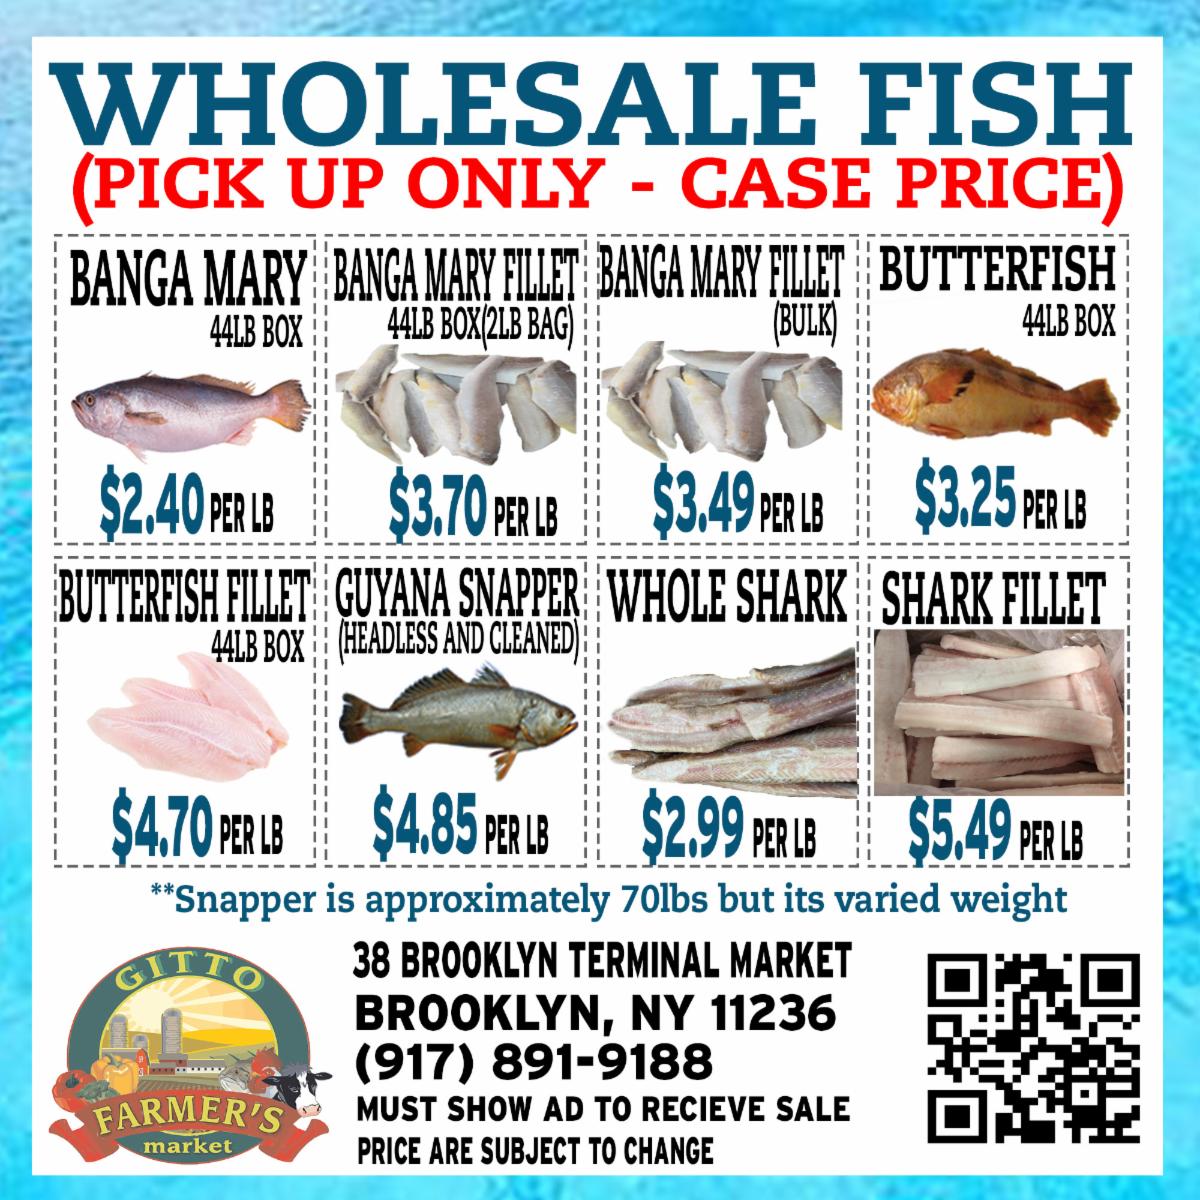 Attention all restaurant and catering businesses! Are you in need of high-quality and delicious seafood options for your menu? #wholesalefish #guyanaseafood #restaurantcatering #frozenseafood #freshflavorfulfish